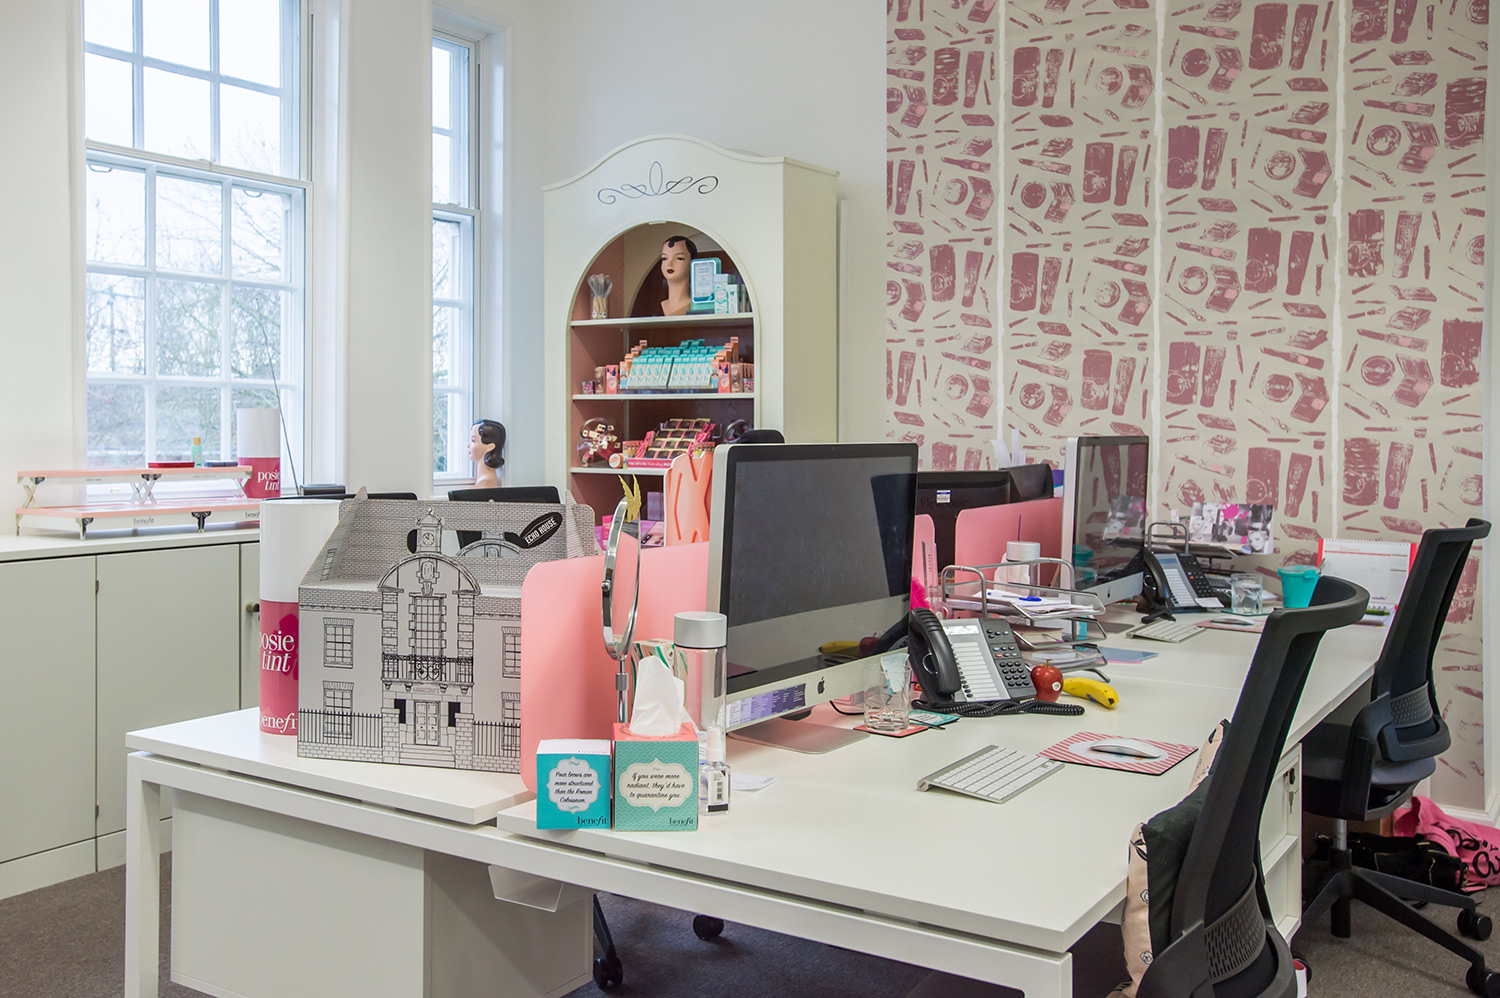 Benefit Cosmetics UK & Ireland Office Fit-Out Spacio